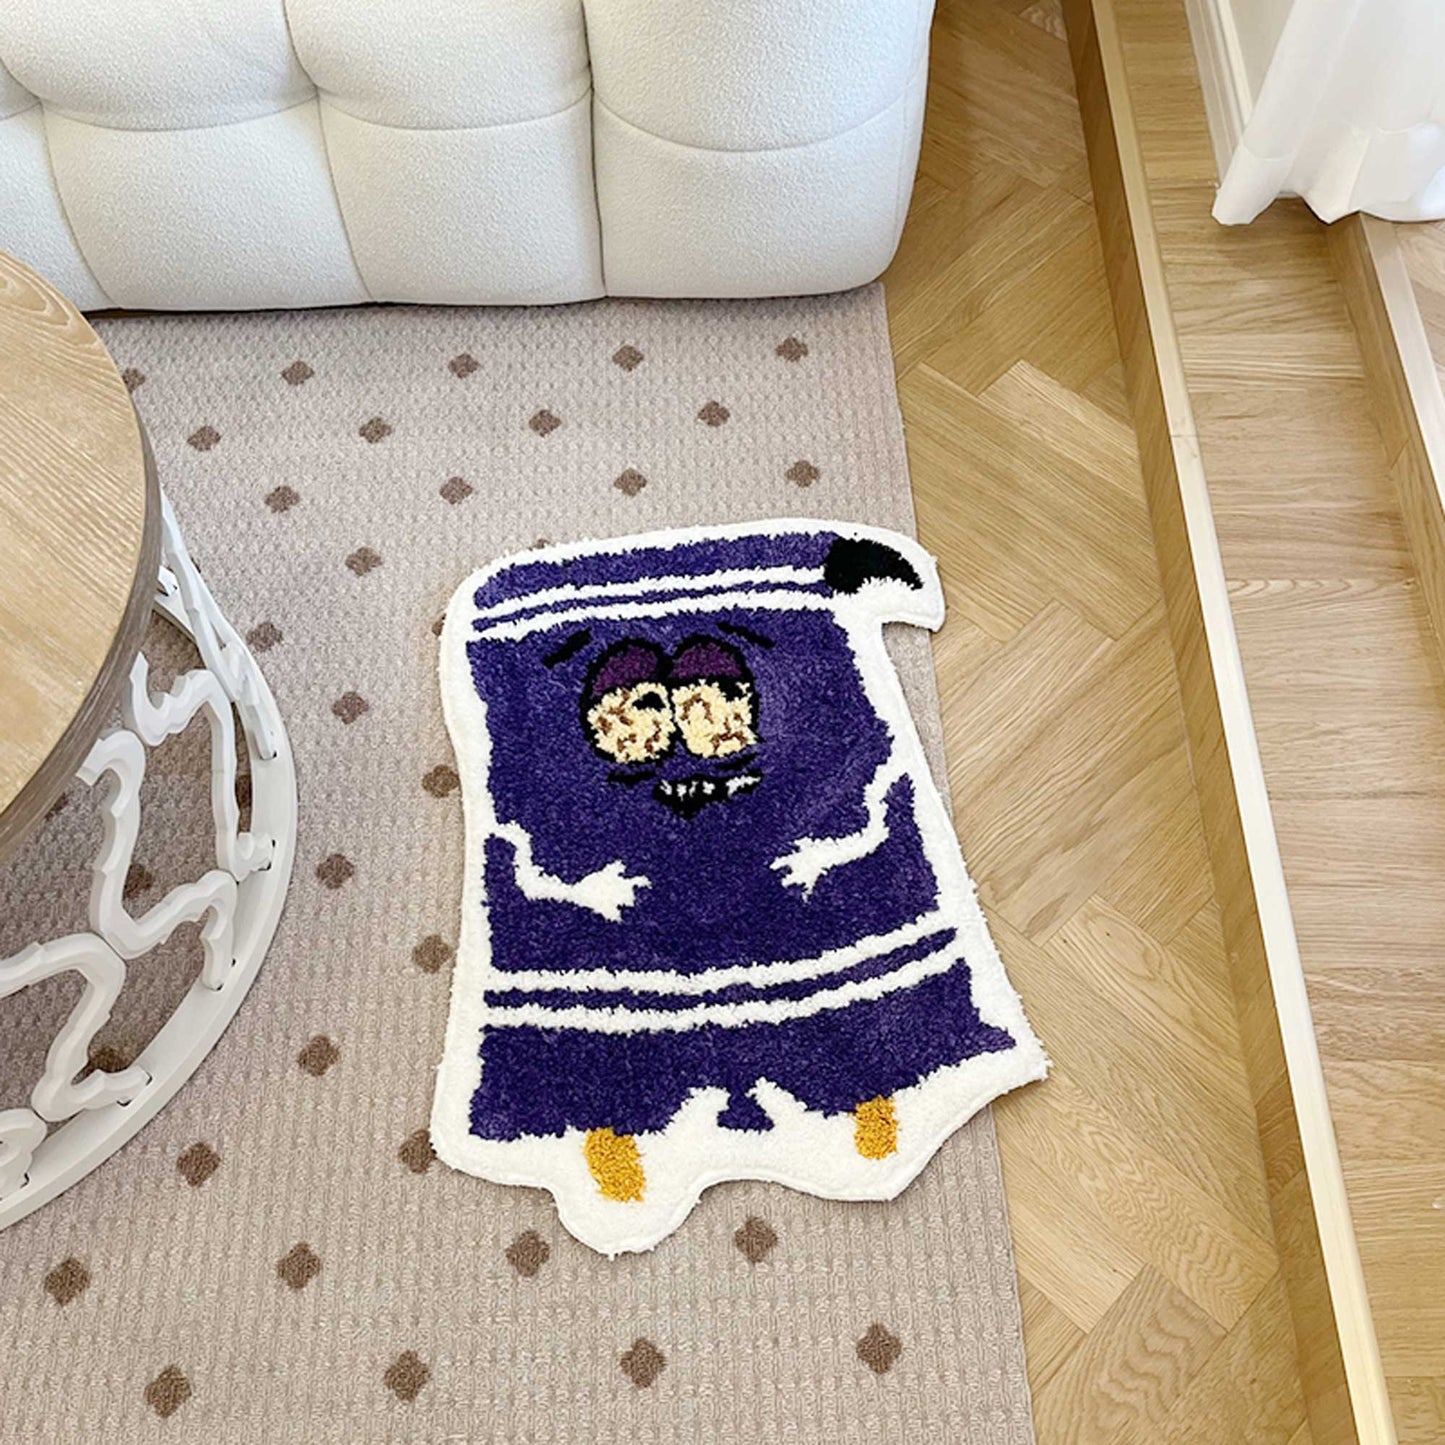 Tufted Rug South Park Towelie Rug Front in a Living Room